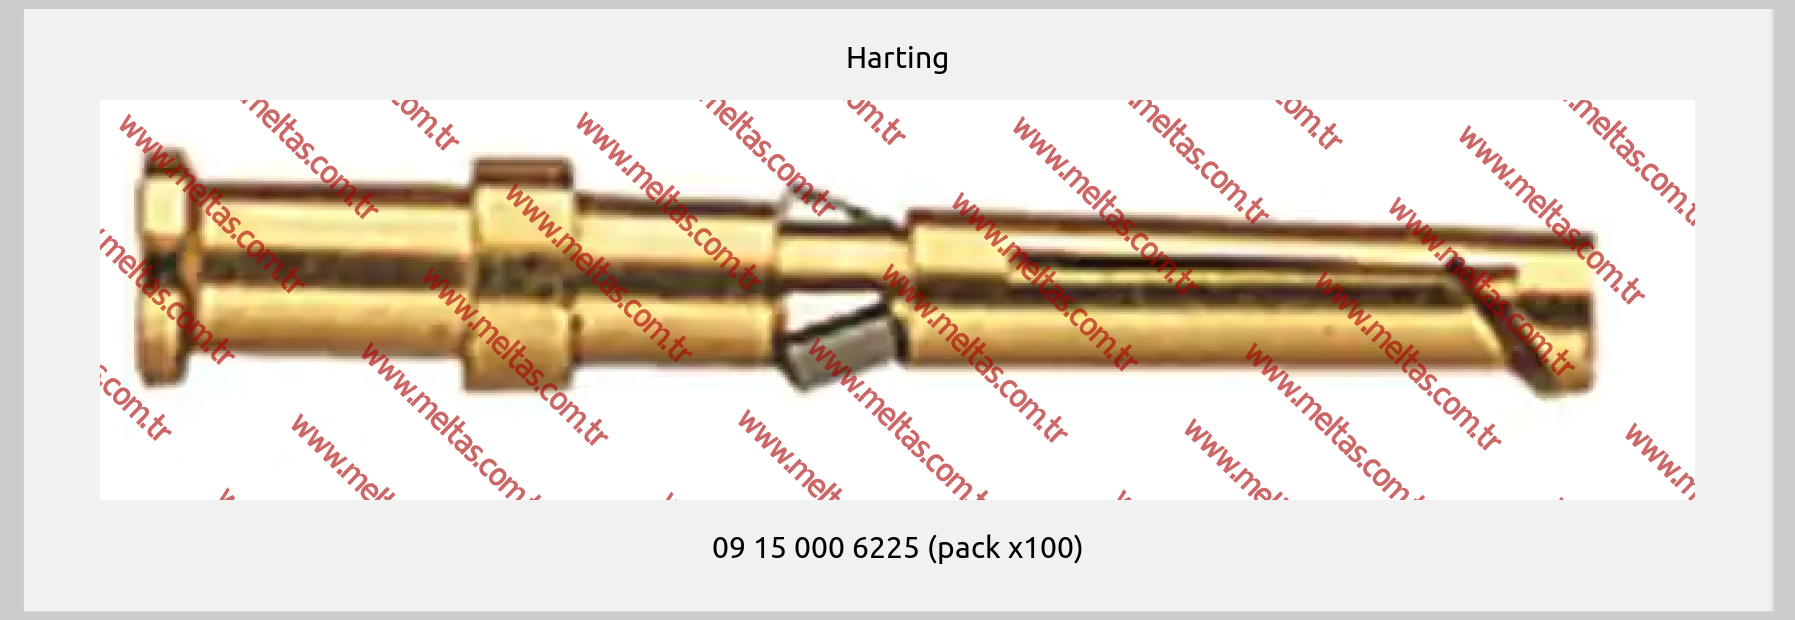 Harting - 09 15 000 6225 (pack x100)